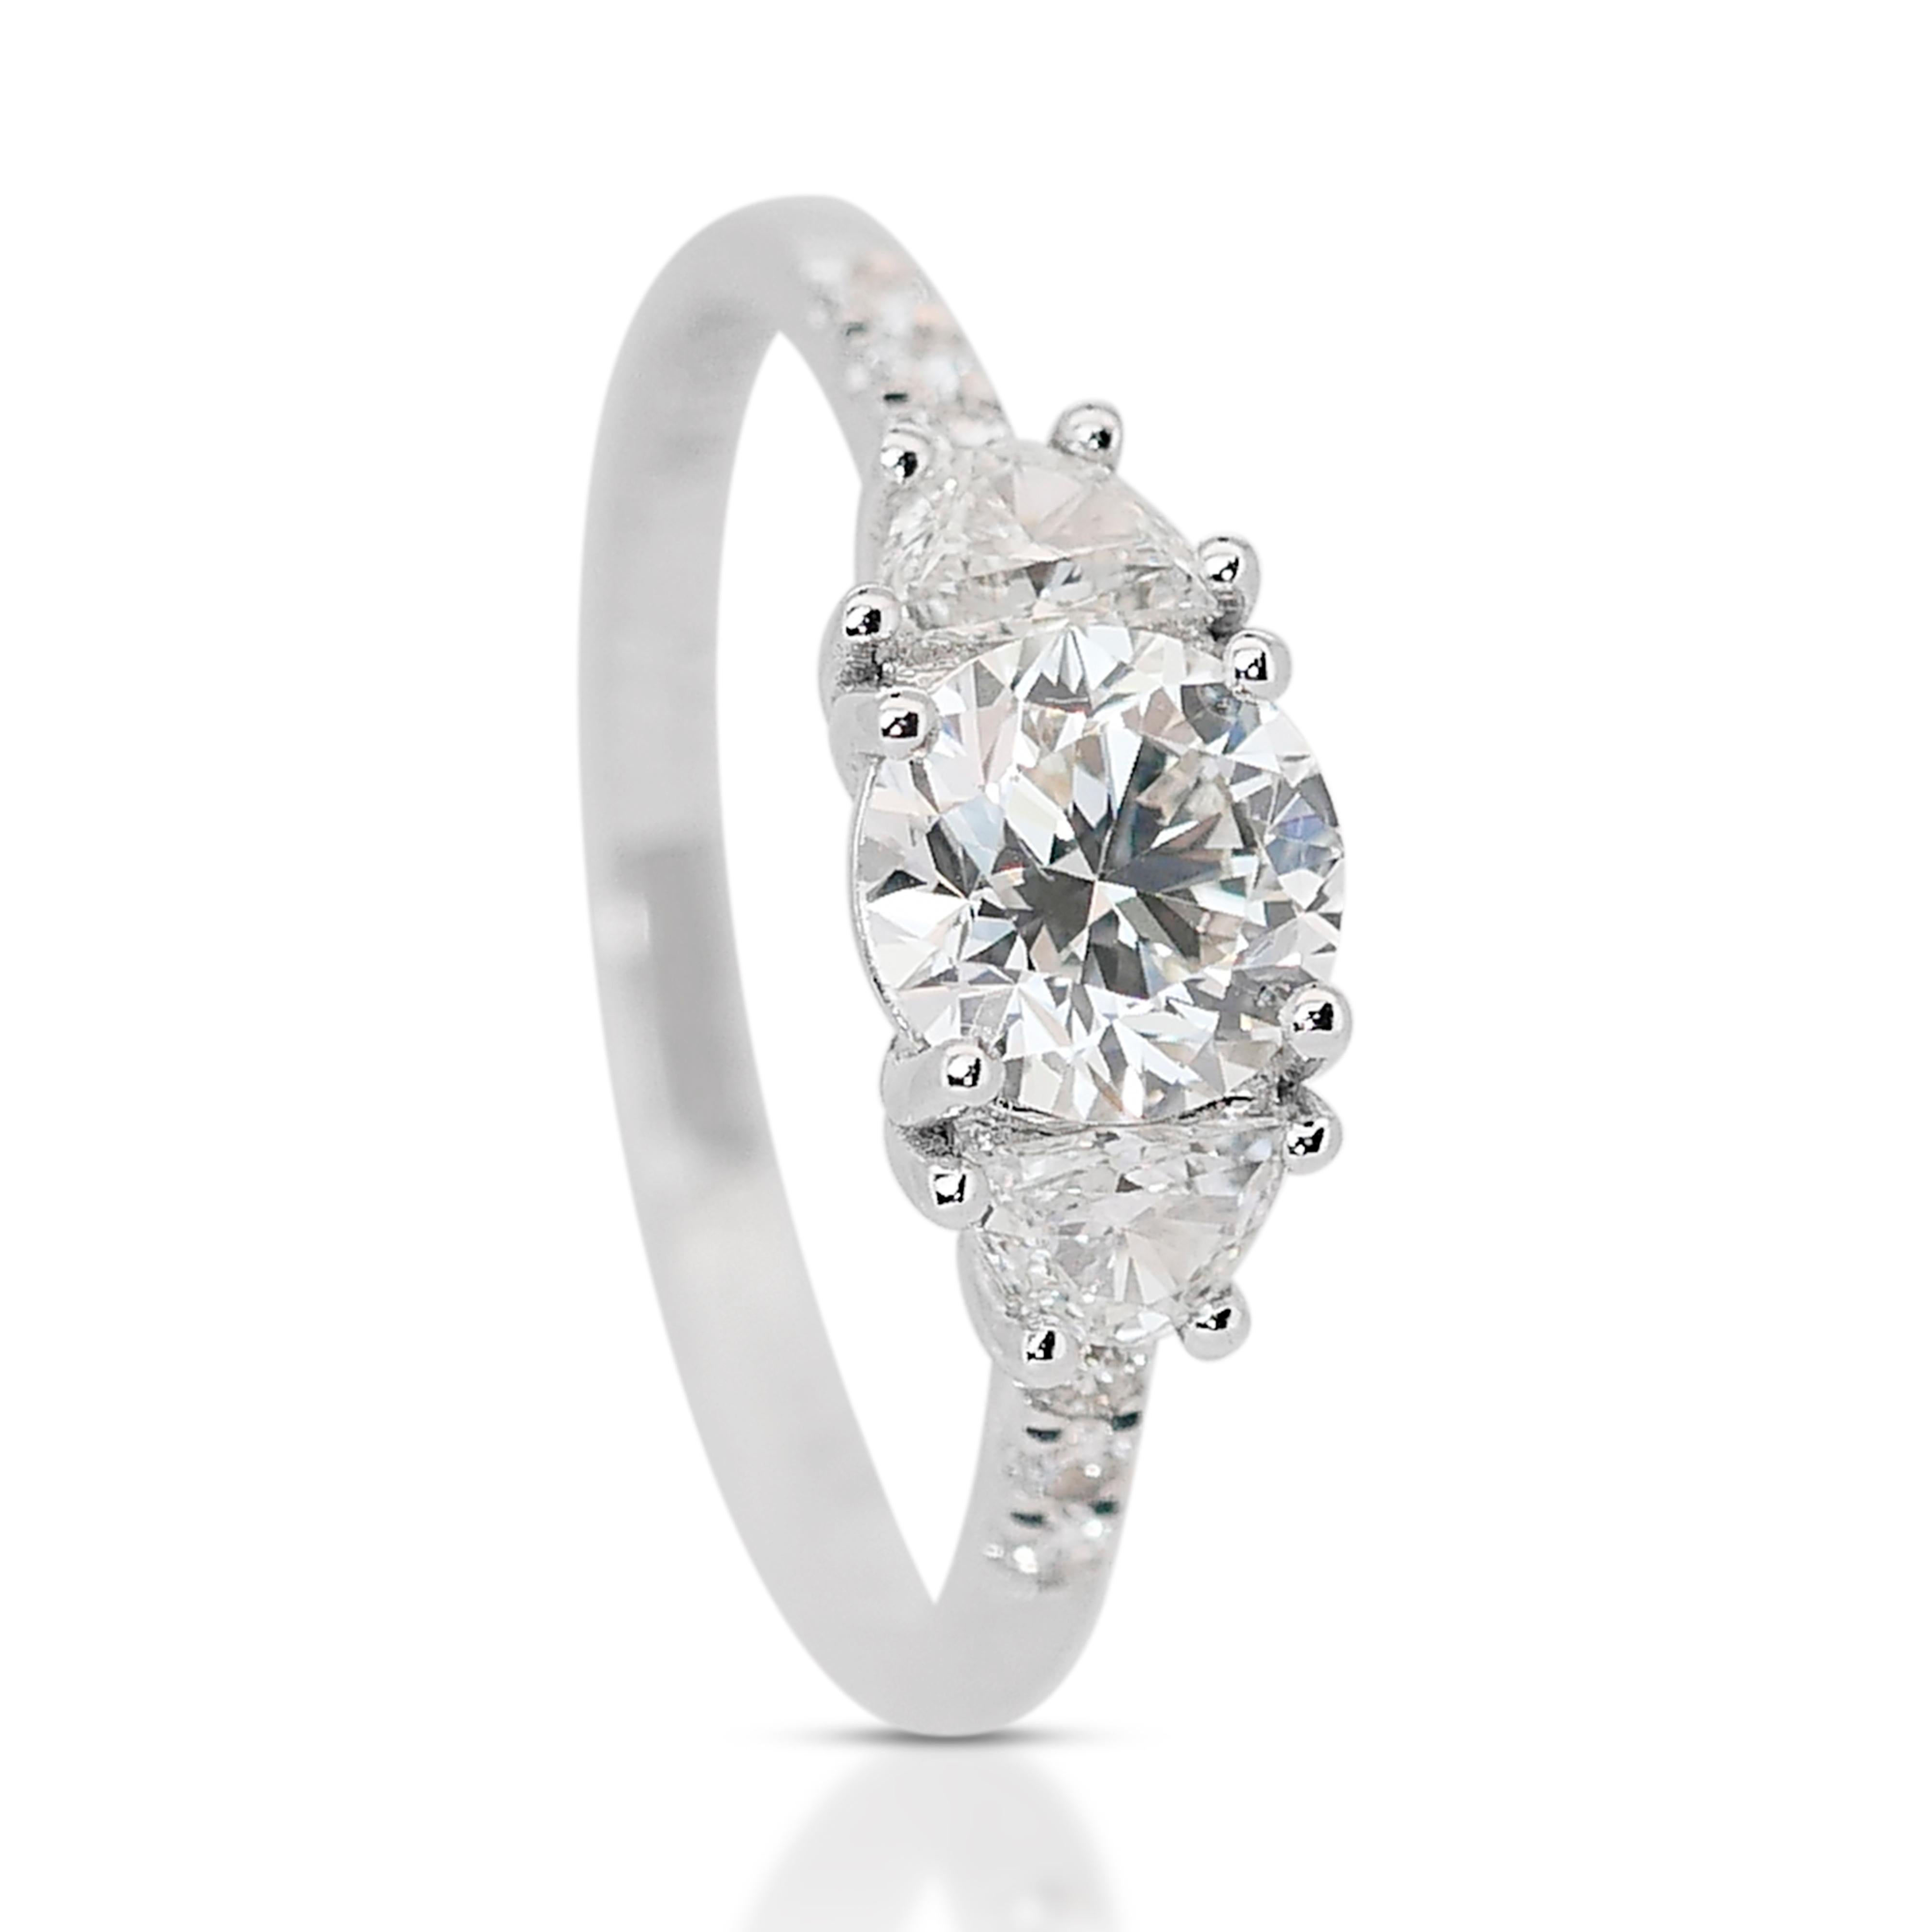 Luminous 18k White Gold Diamond Pave Ring w/2.00 ct - IGI Certified

Embrace the luxurious allure of our 18k white gold diamond ring, a symbol of elegance and refined taste. Centrally featuring a mesmerizing 1.02 ct round diamond. Complementing the